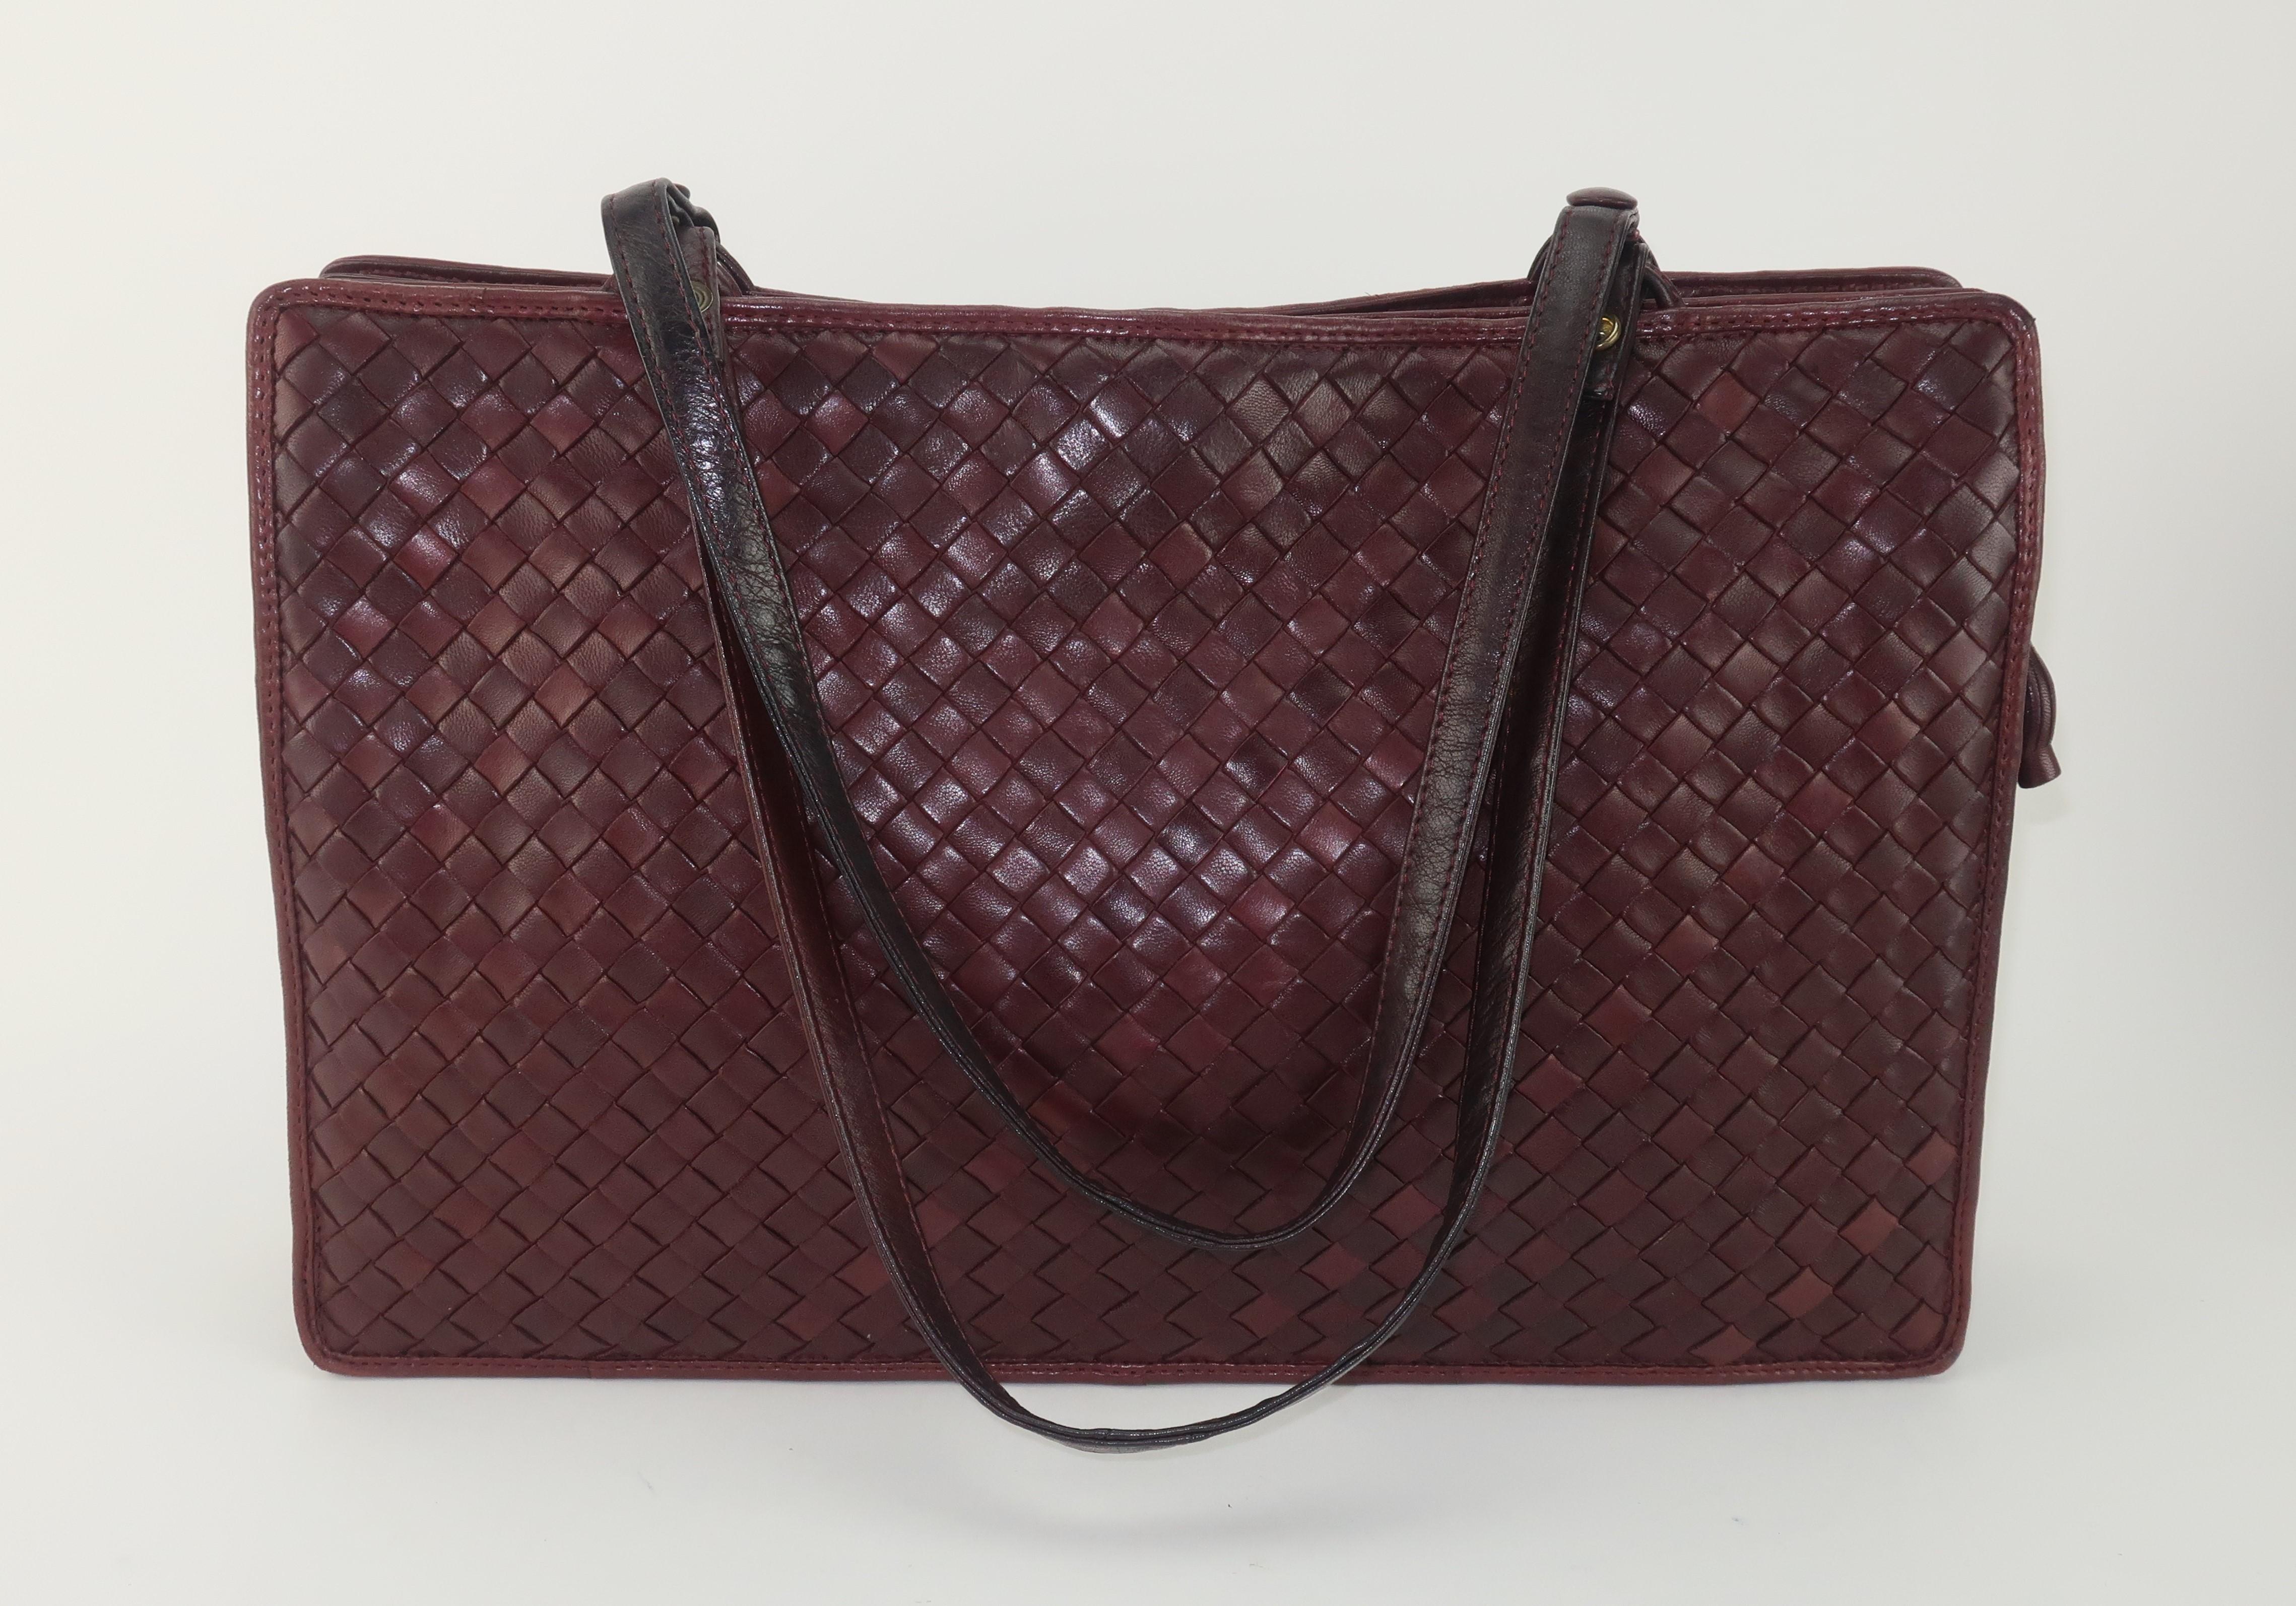 'When your own initials are enough' ... the iconic philosophy of the Italian fashion house, Bottega Veneta.  Bottega's unique 'intrecciato' woven leather design speaks volumes about style and quality without the necessity of a logo.  This beautiful